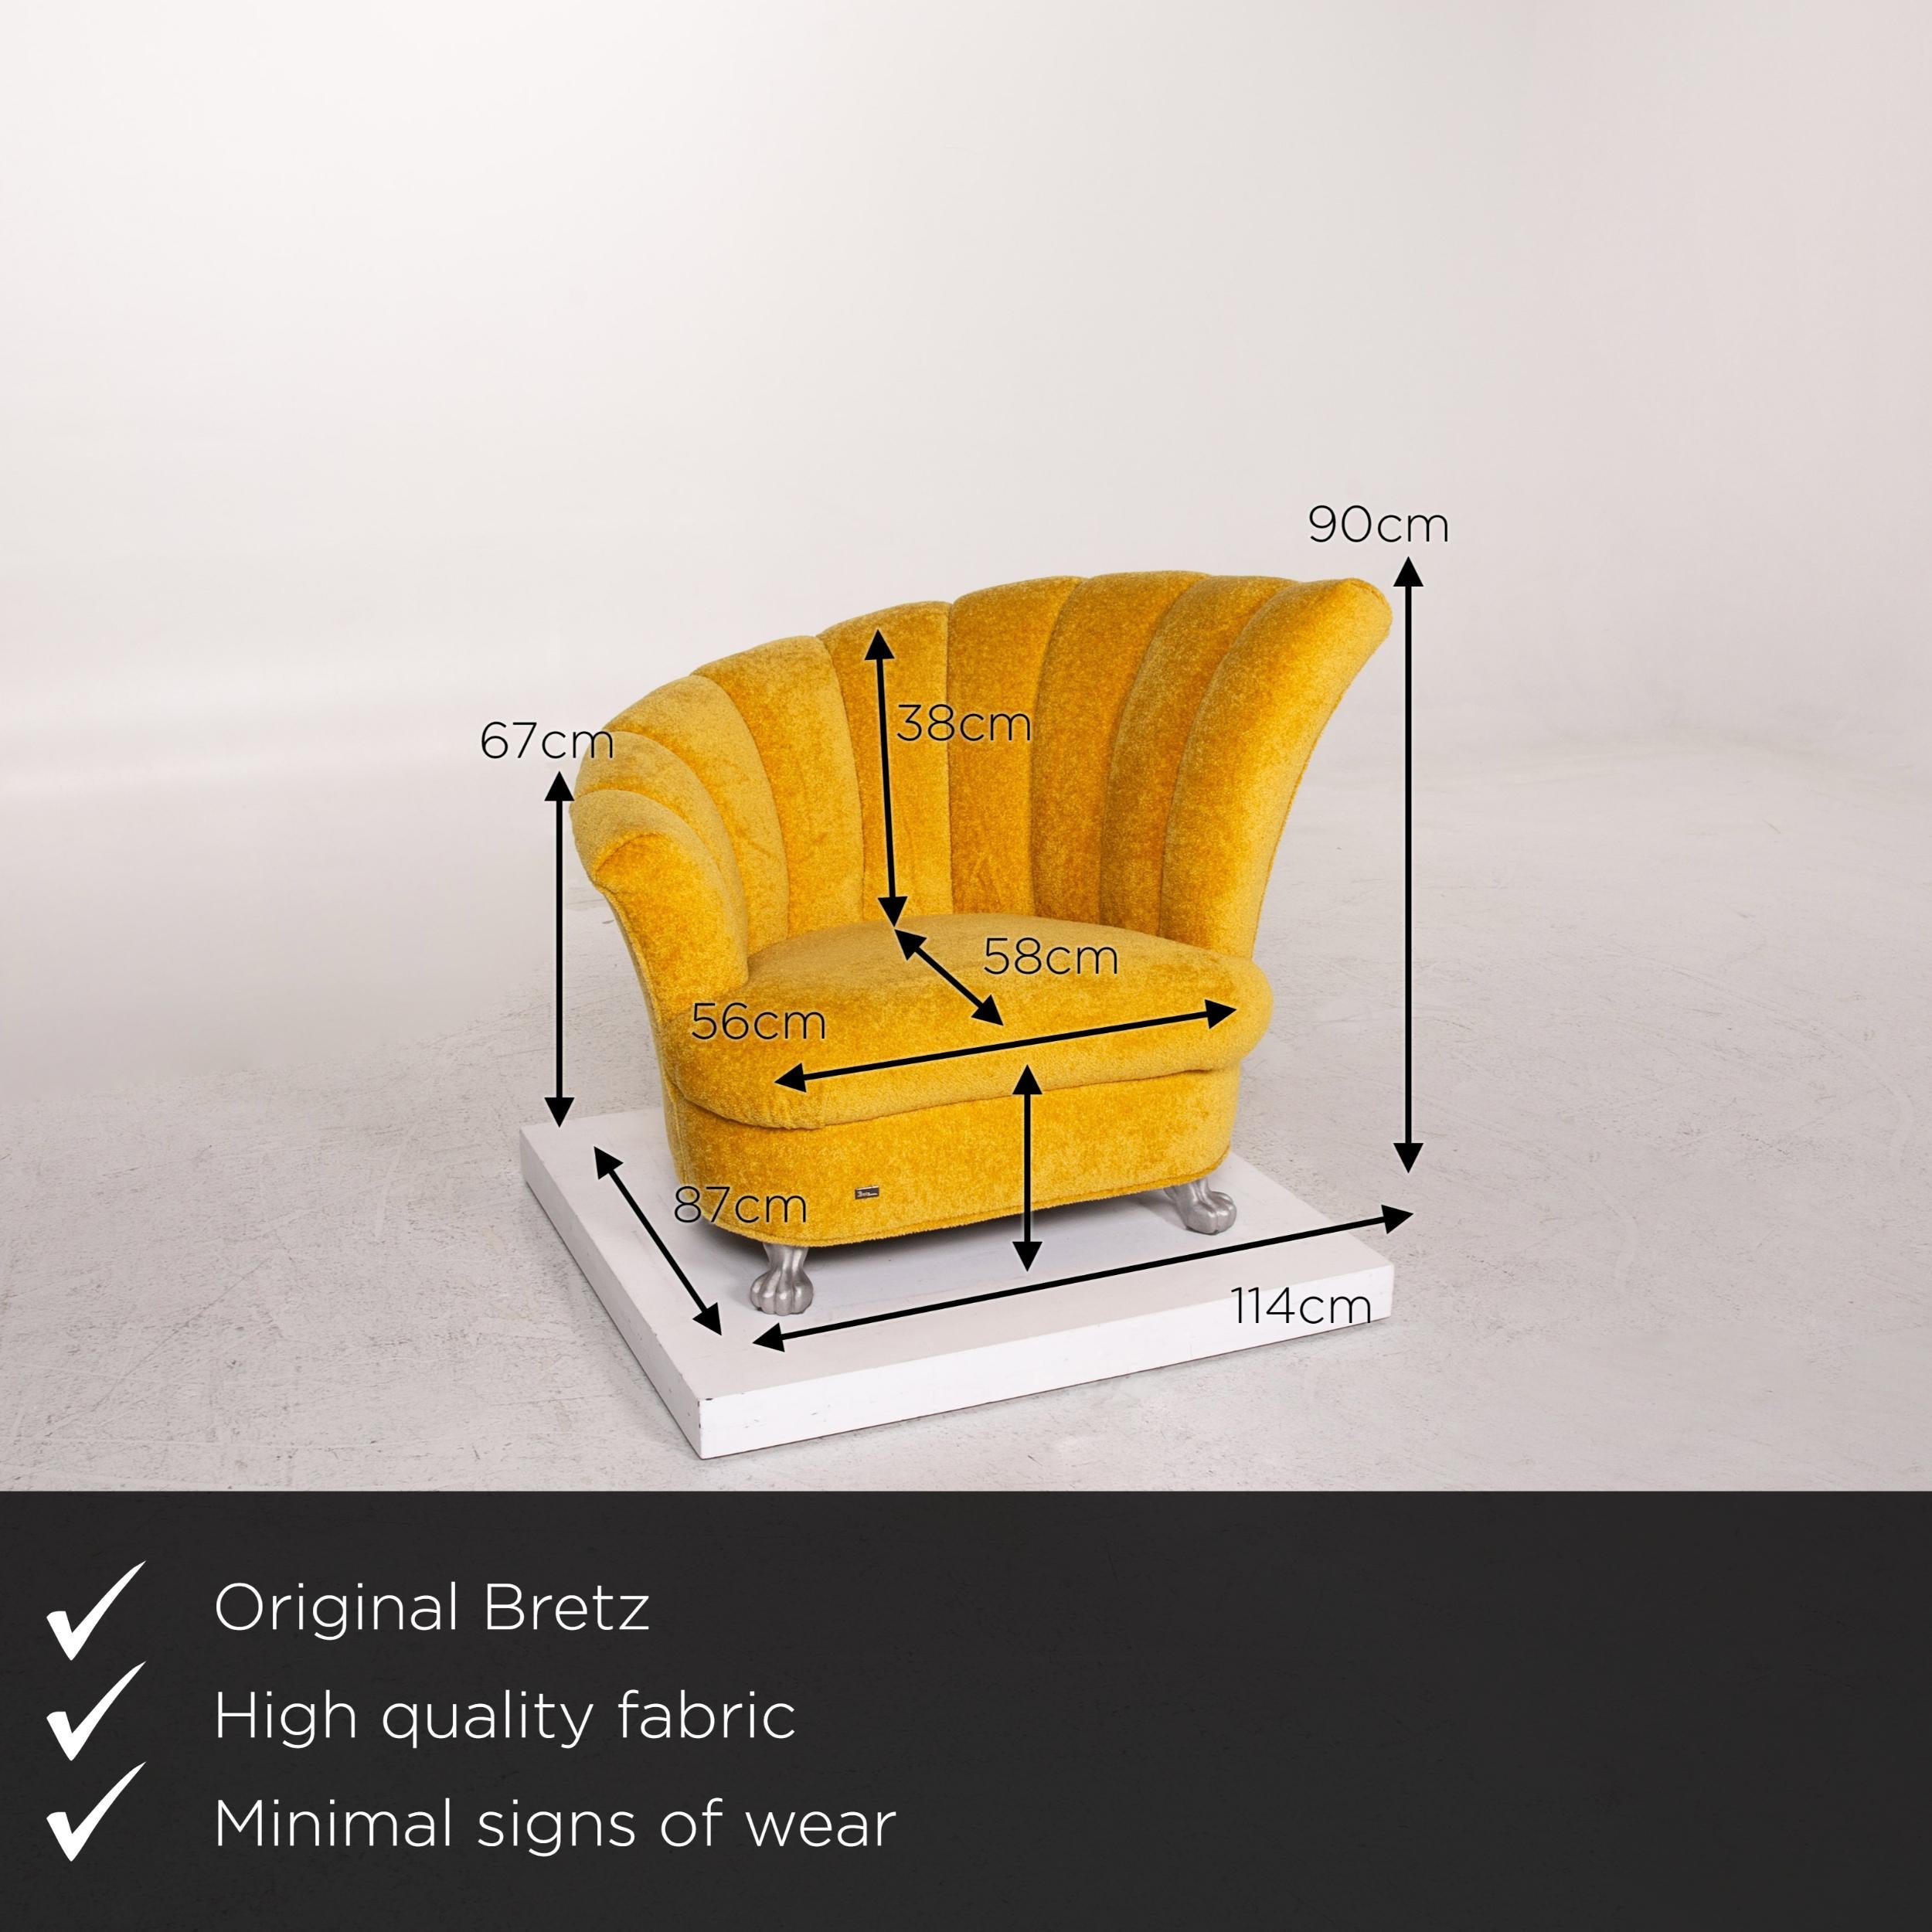 We present to you a Bretz fabric armchair yellow.
     
 

 Product measurements in centimeters:
 

Depth 87
Width 114
Height 90
Seat height 43
Rest height 64
Seat depth 58
Seat width 56
Back height 38.